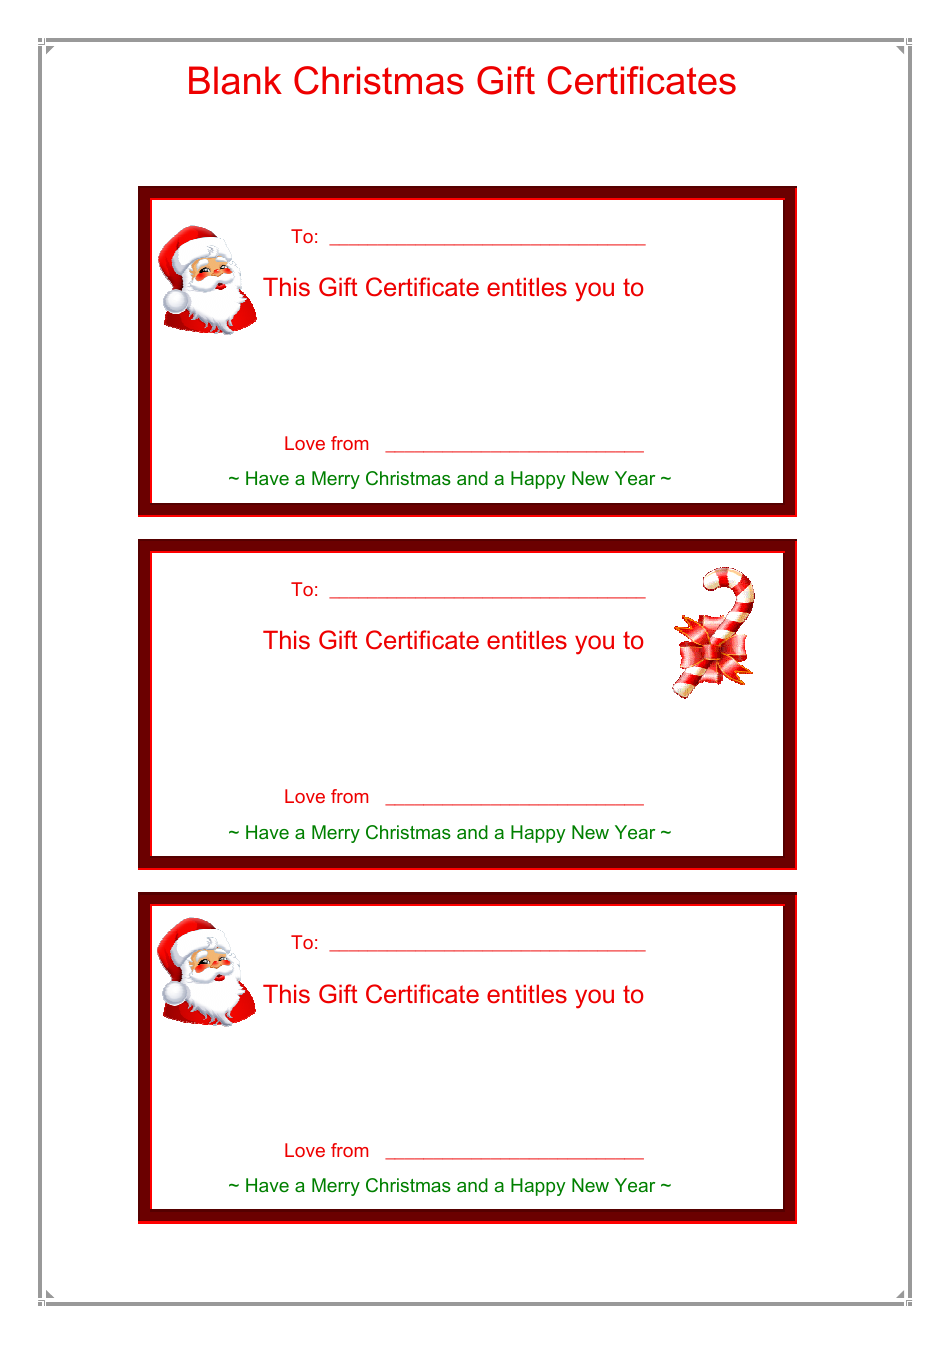 Blank Christmas Gift Certificate Template - Preview